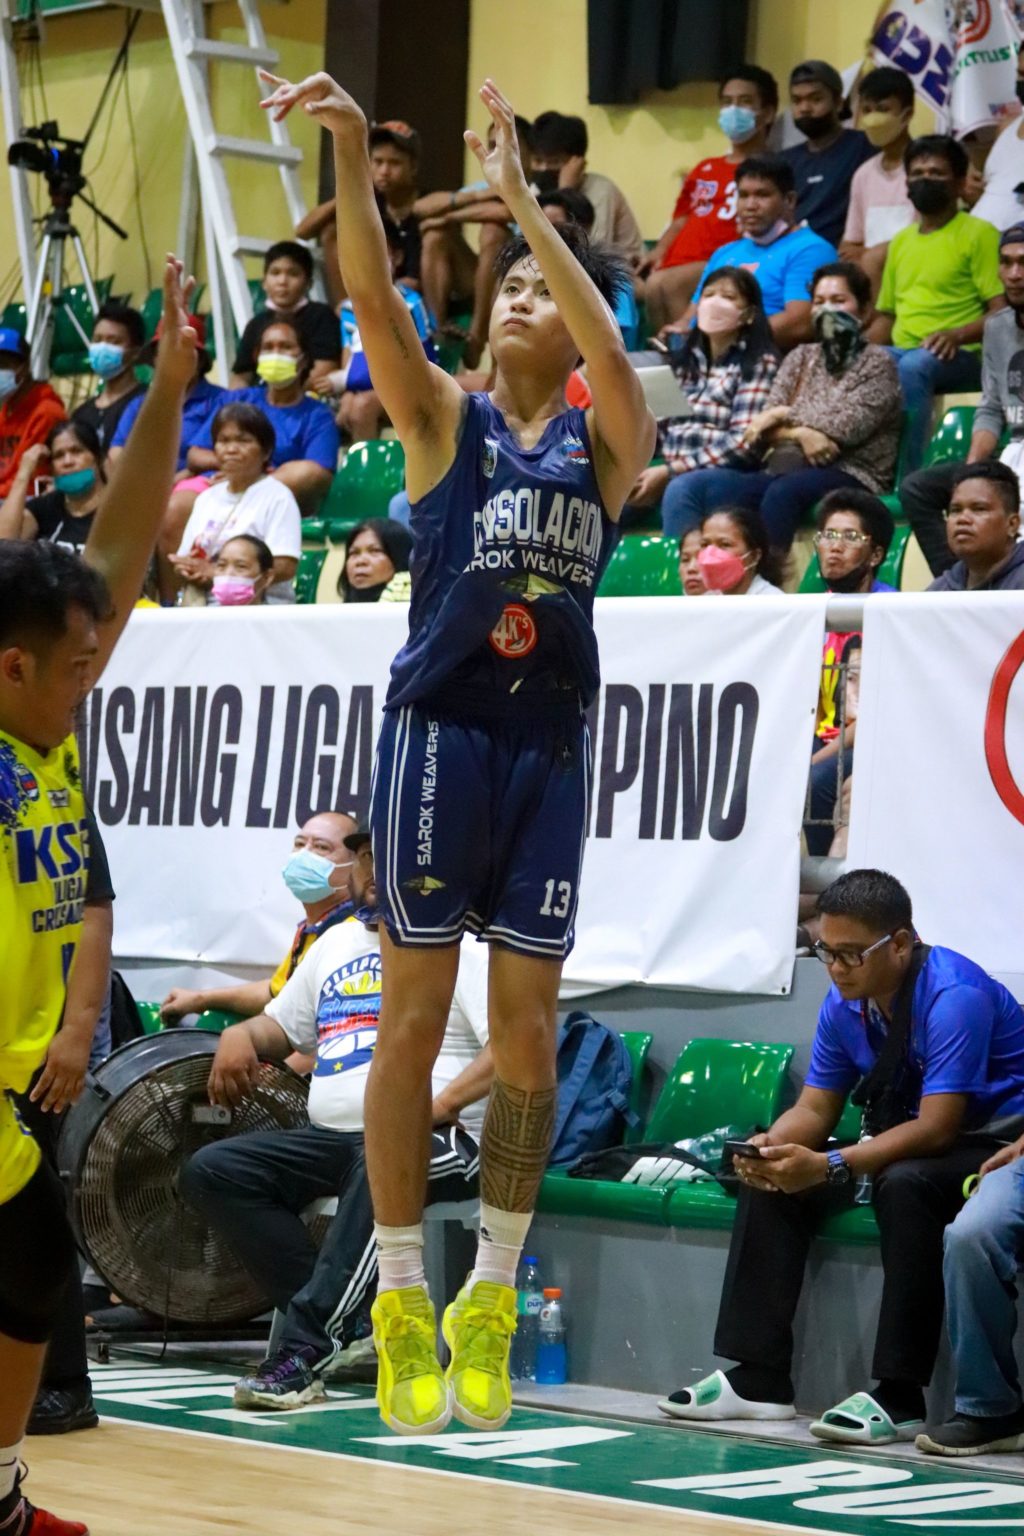 SAROK WEAVERS WIN. Gyle Patrick Montaño of Consolacion Sarok Weavers attempts a jump shot during their game against the KSB Iligan Crusaders in the PSL U-21 tourney. | Photo from PSL Media Bureau.